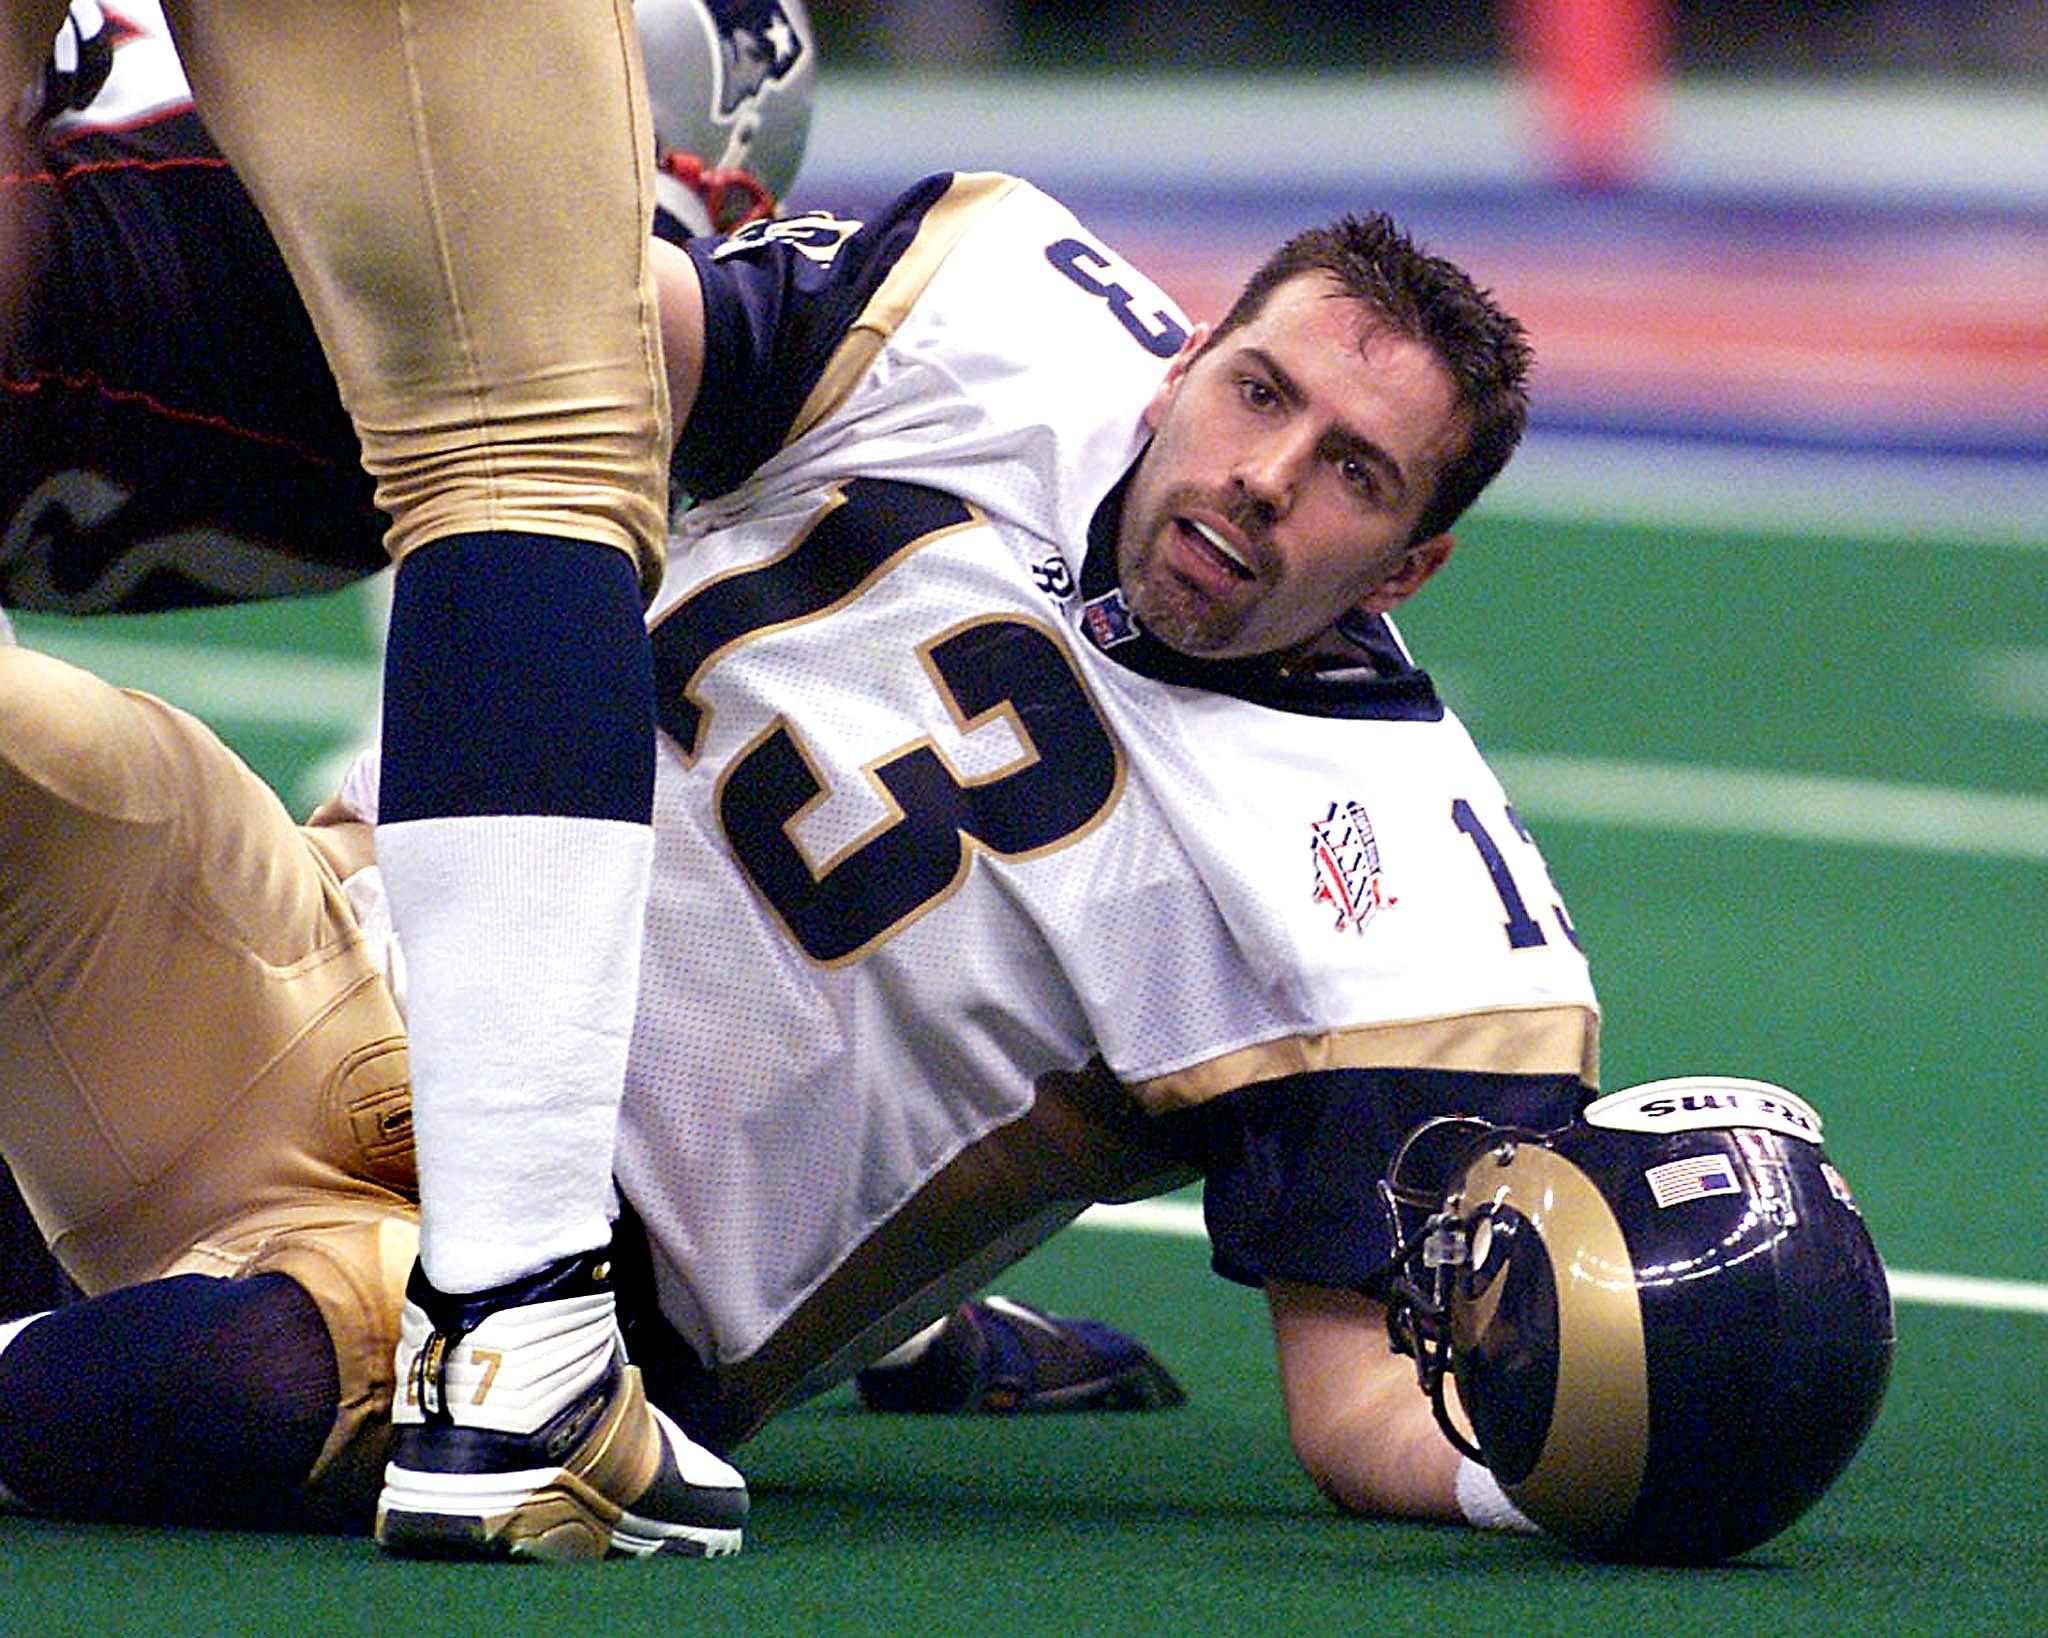 St. Louis Rams' quarterback Kurt Warner lies on the turf after being sacked by the New England Patriots during the second half 03 February, 2002 of Super Bowl XXXVI in New Orleans, Louisiana. The Patriots won 20-17. 